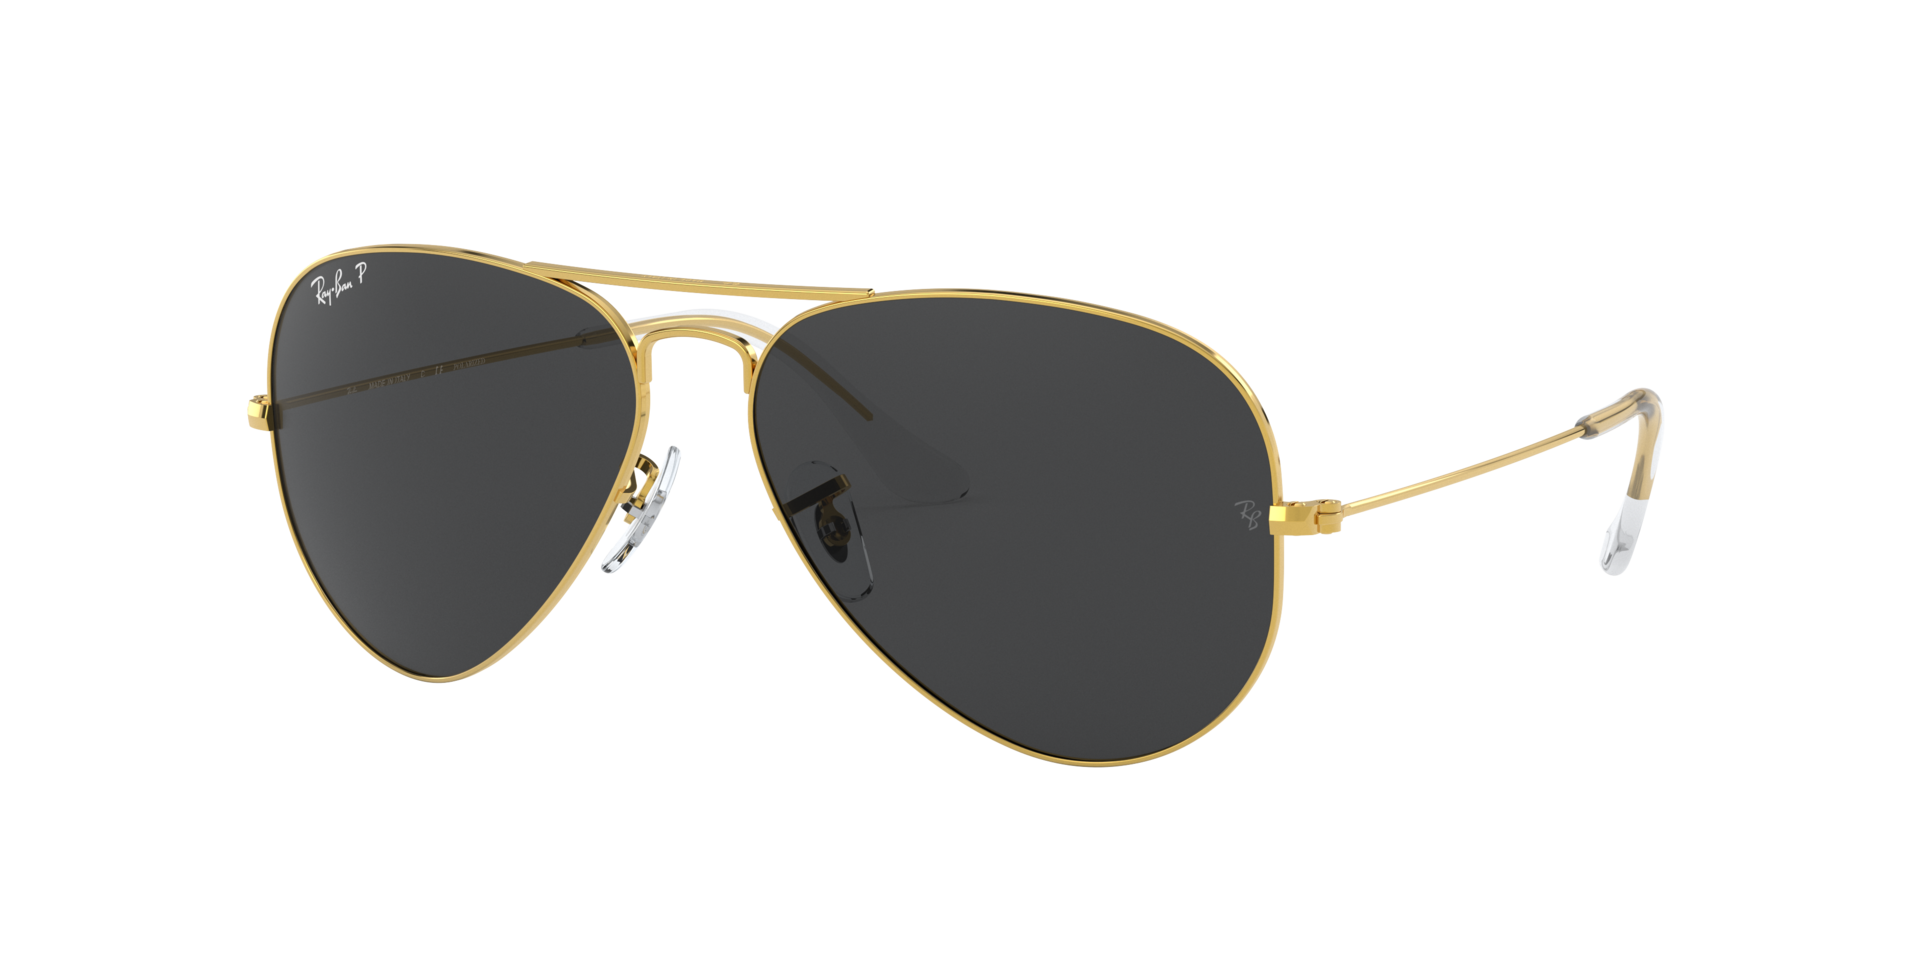 Ray-Ban Aviator Large Metal Sonnenbrille RB3025 919648 55